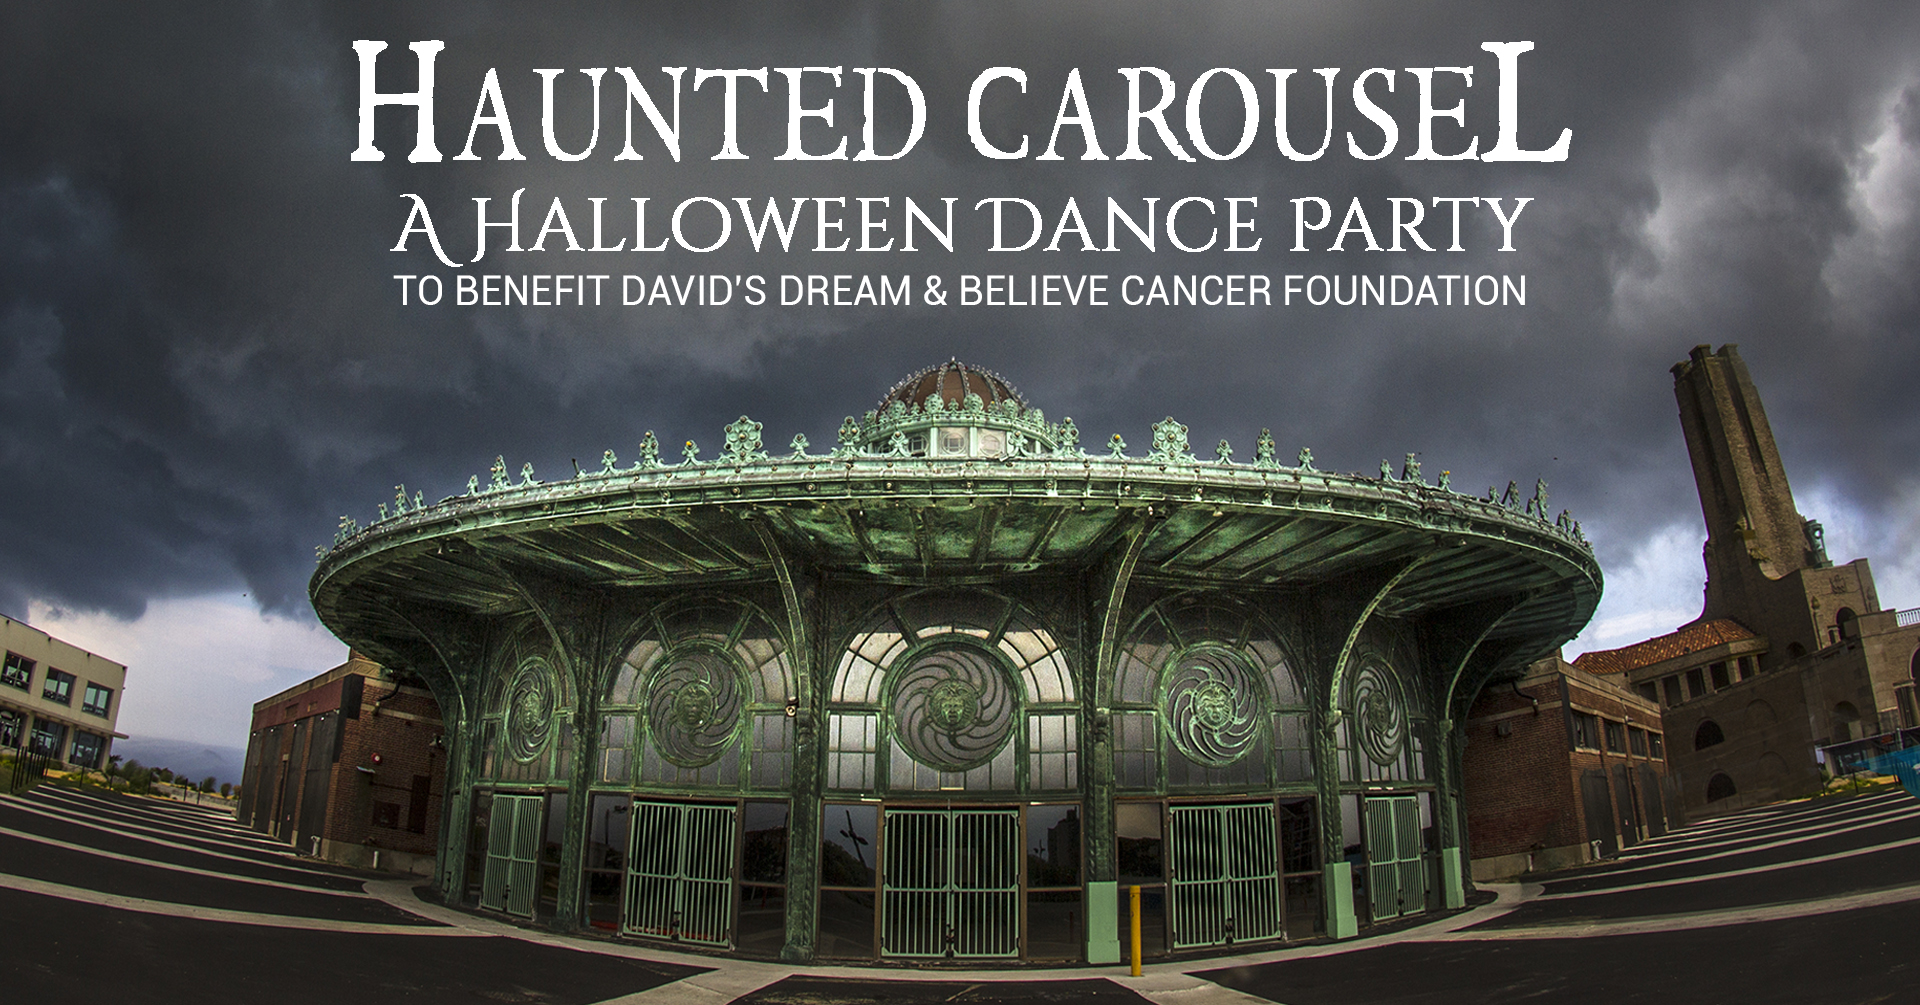 Haunted Carousel Cover Image Version 1